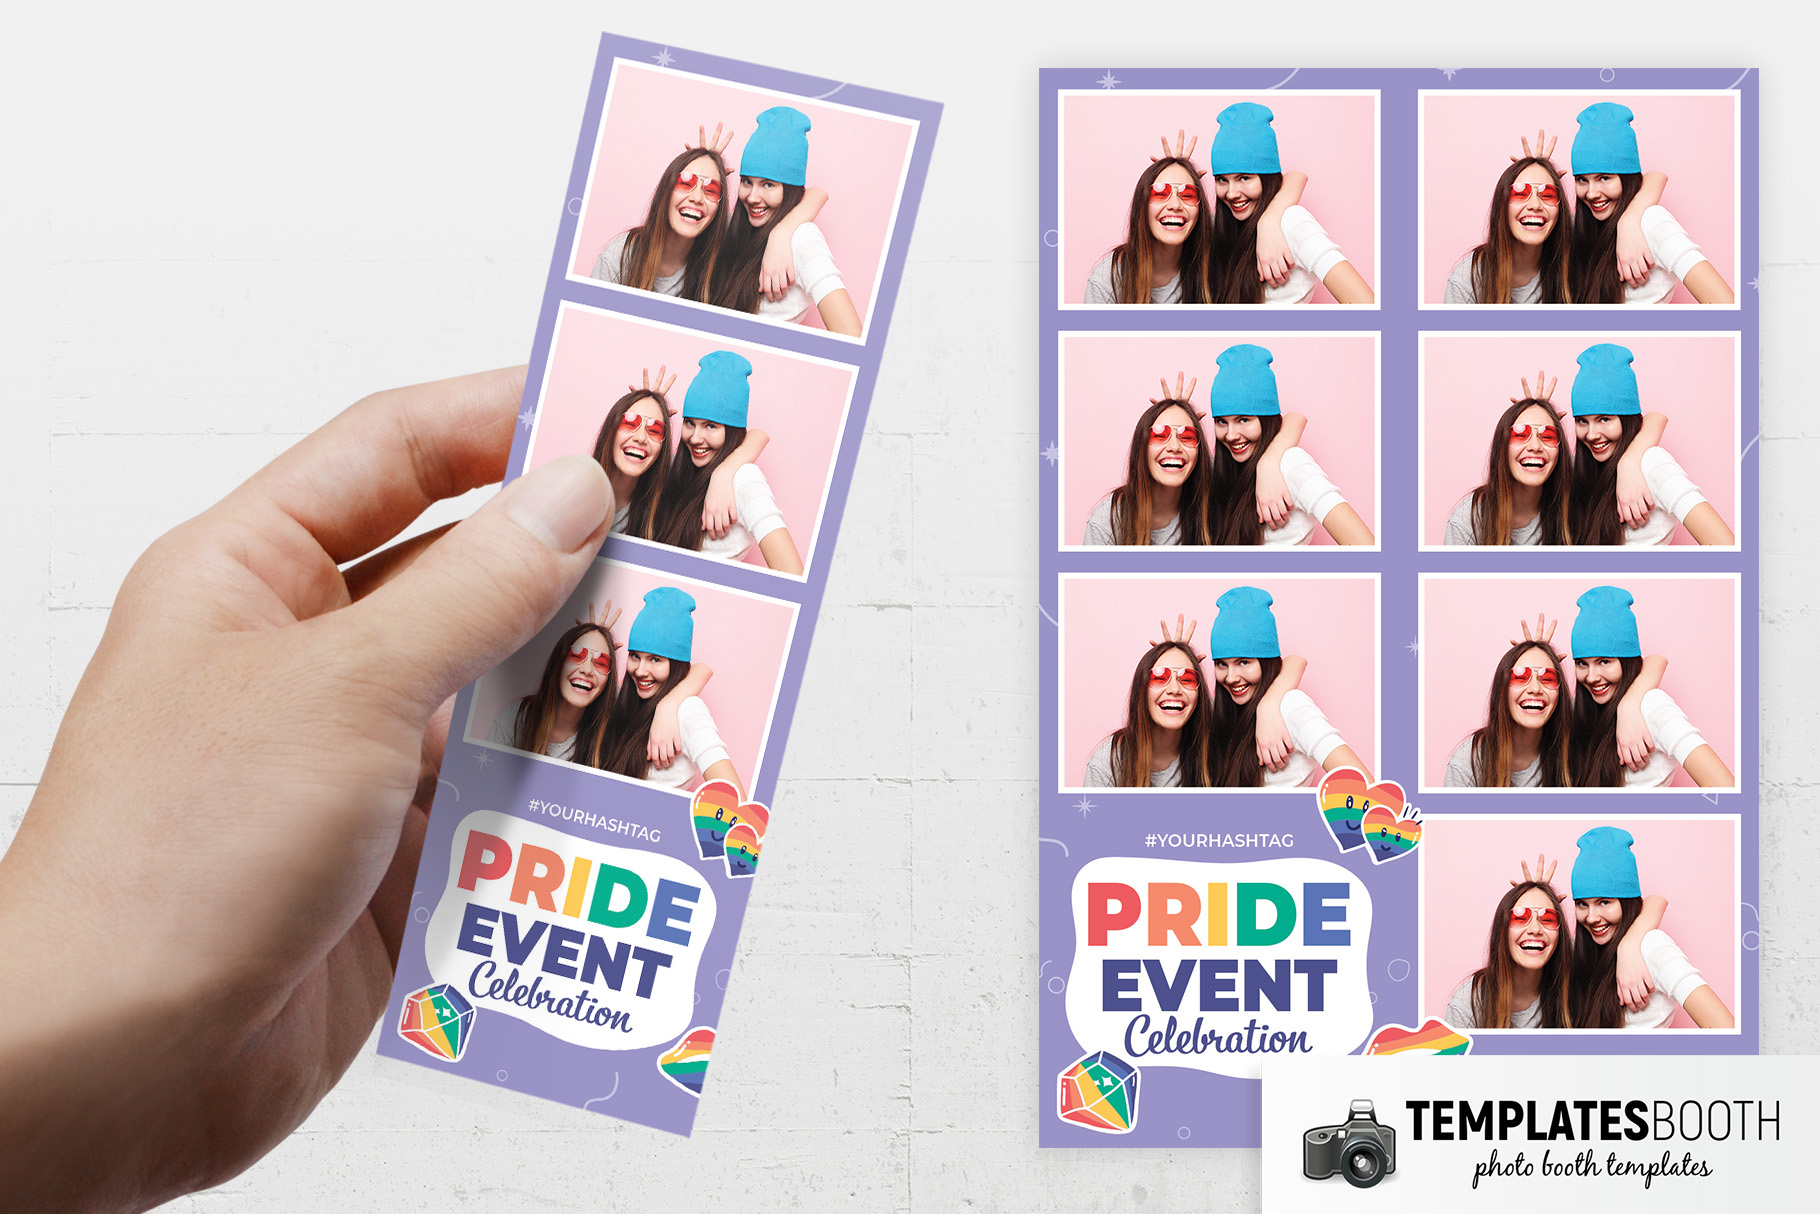 LGBTQ+ Pride Event Photo Booth Template